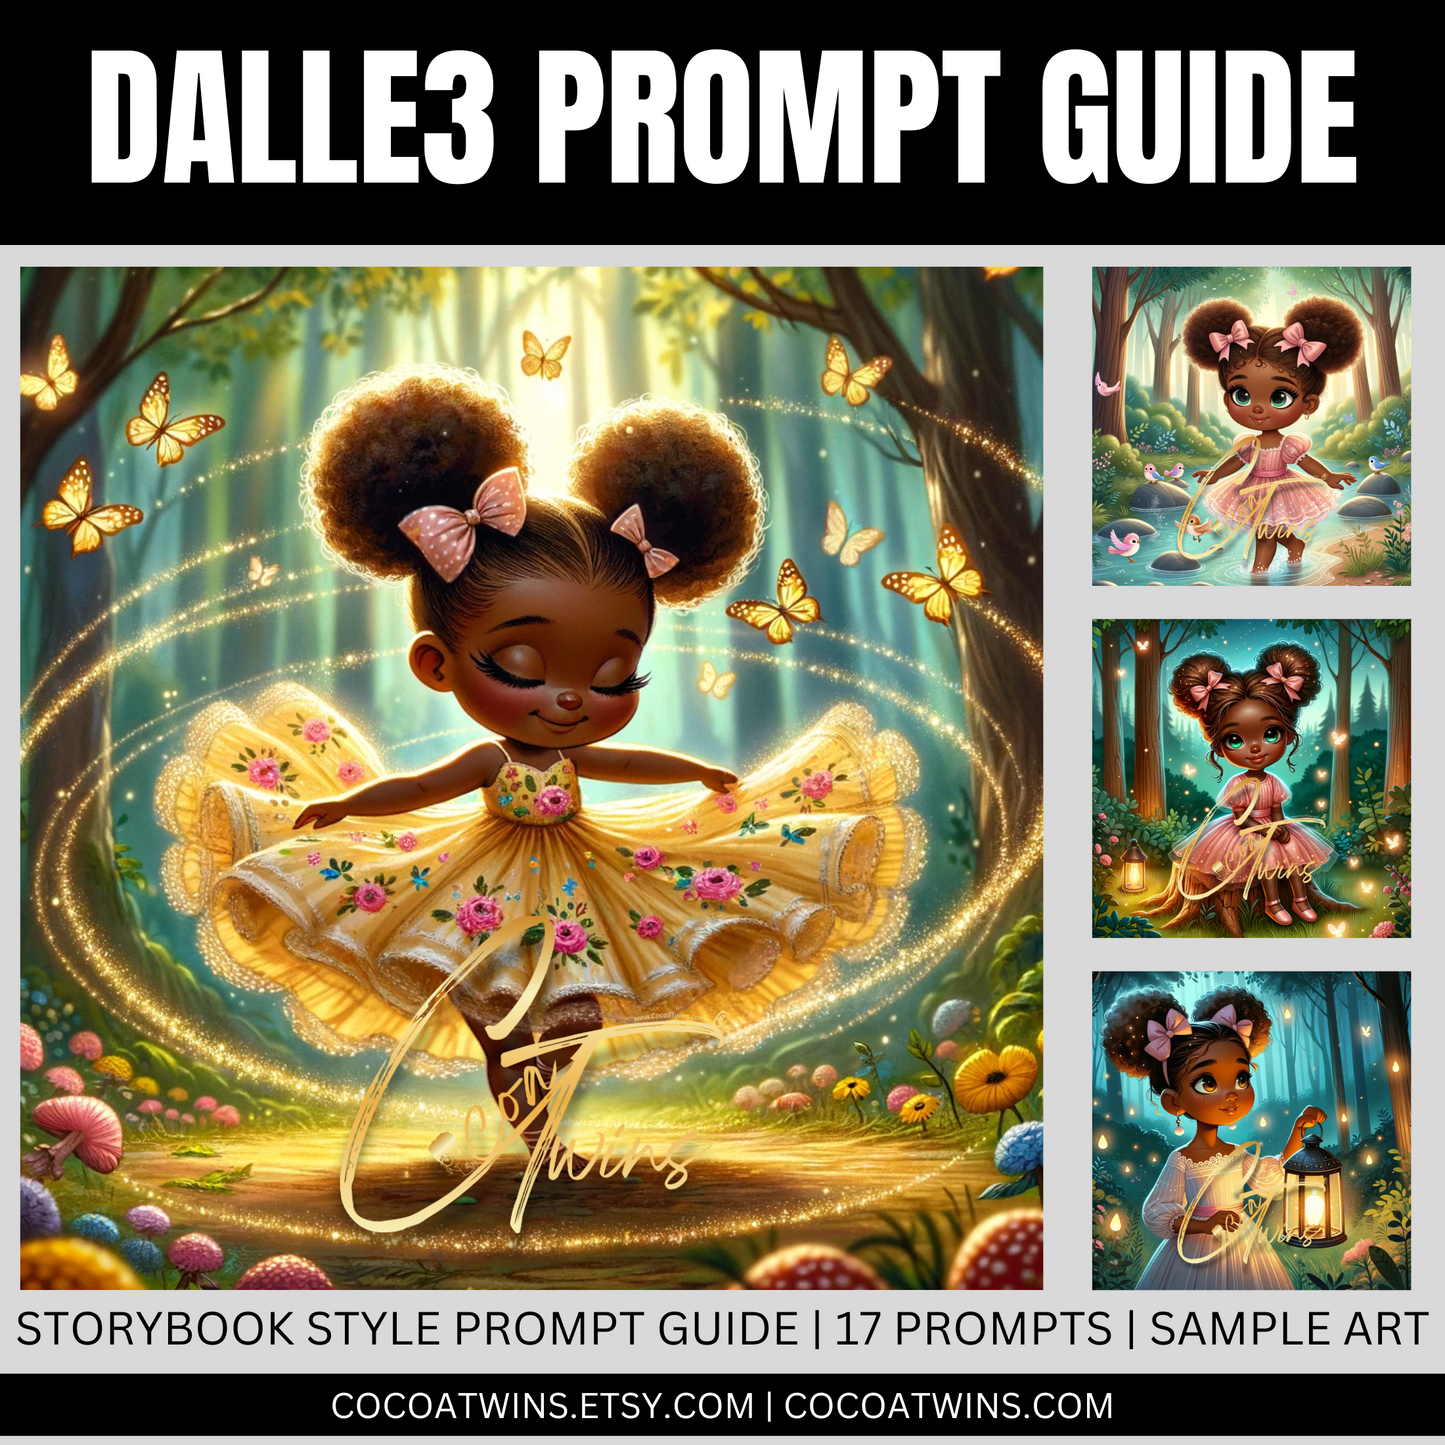 Storybook | PLR Prompt Guide | Limited Quantities